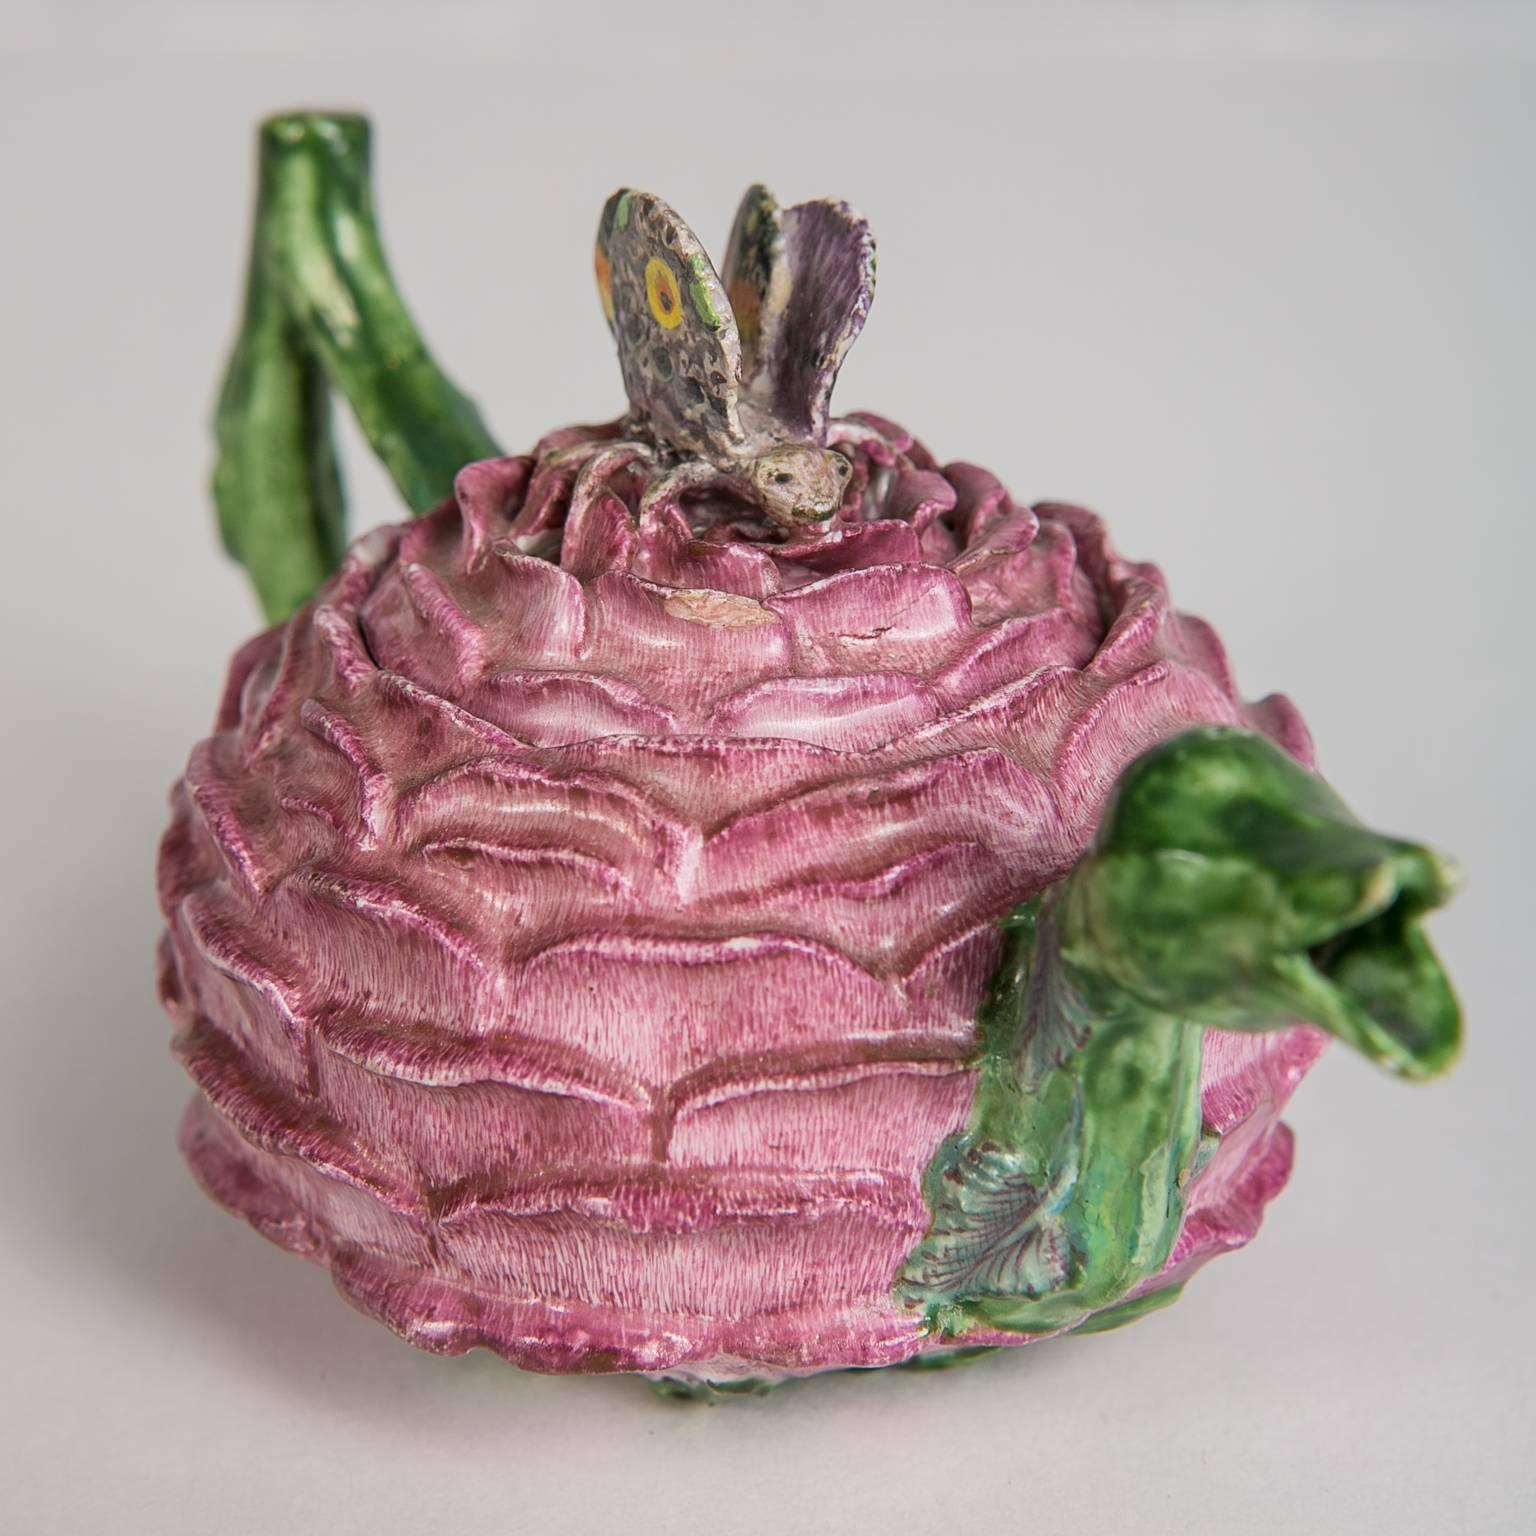 An important Meissen 18th century miniature tea pot in the form of a pink rose. On the cover of the tea pot a butterfly has landed. The tea pot has a green crabstock handle and green spout in the form of a dragon. The bottom is covered with a large